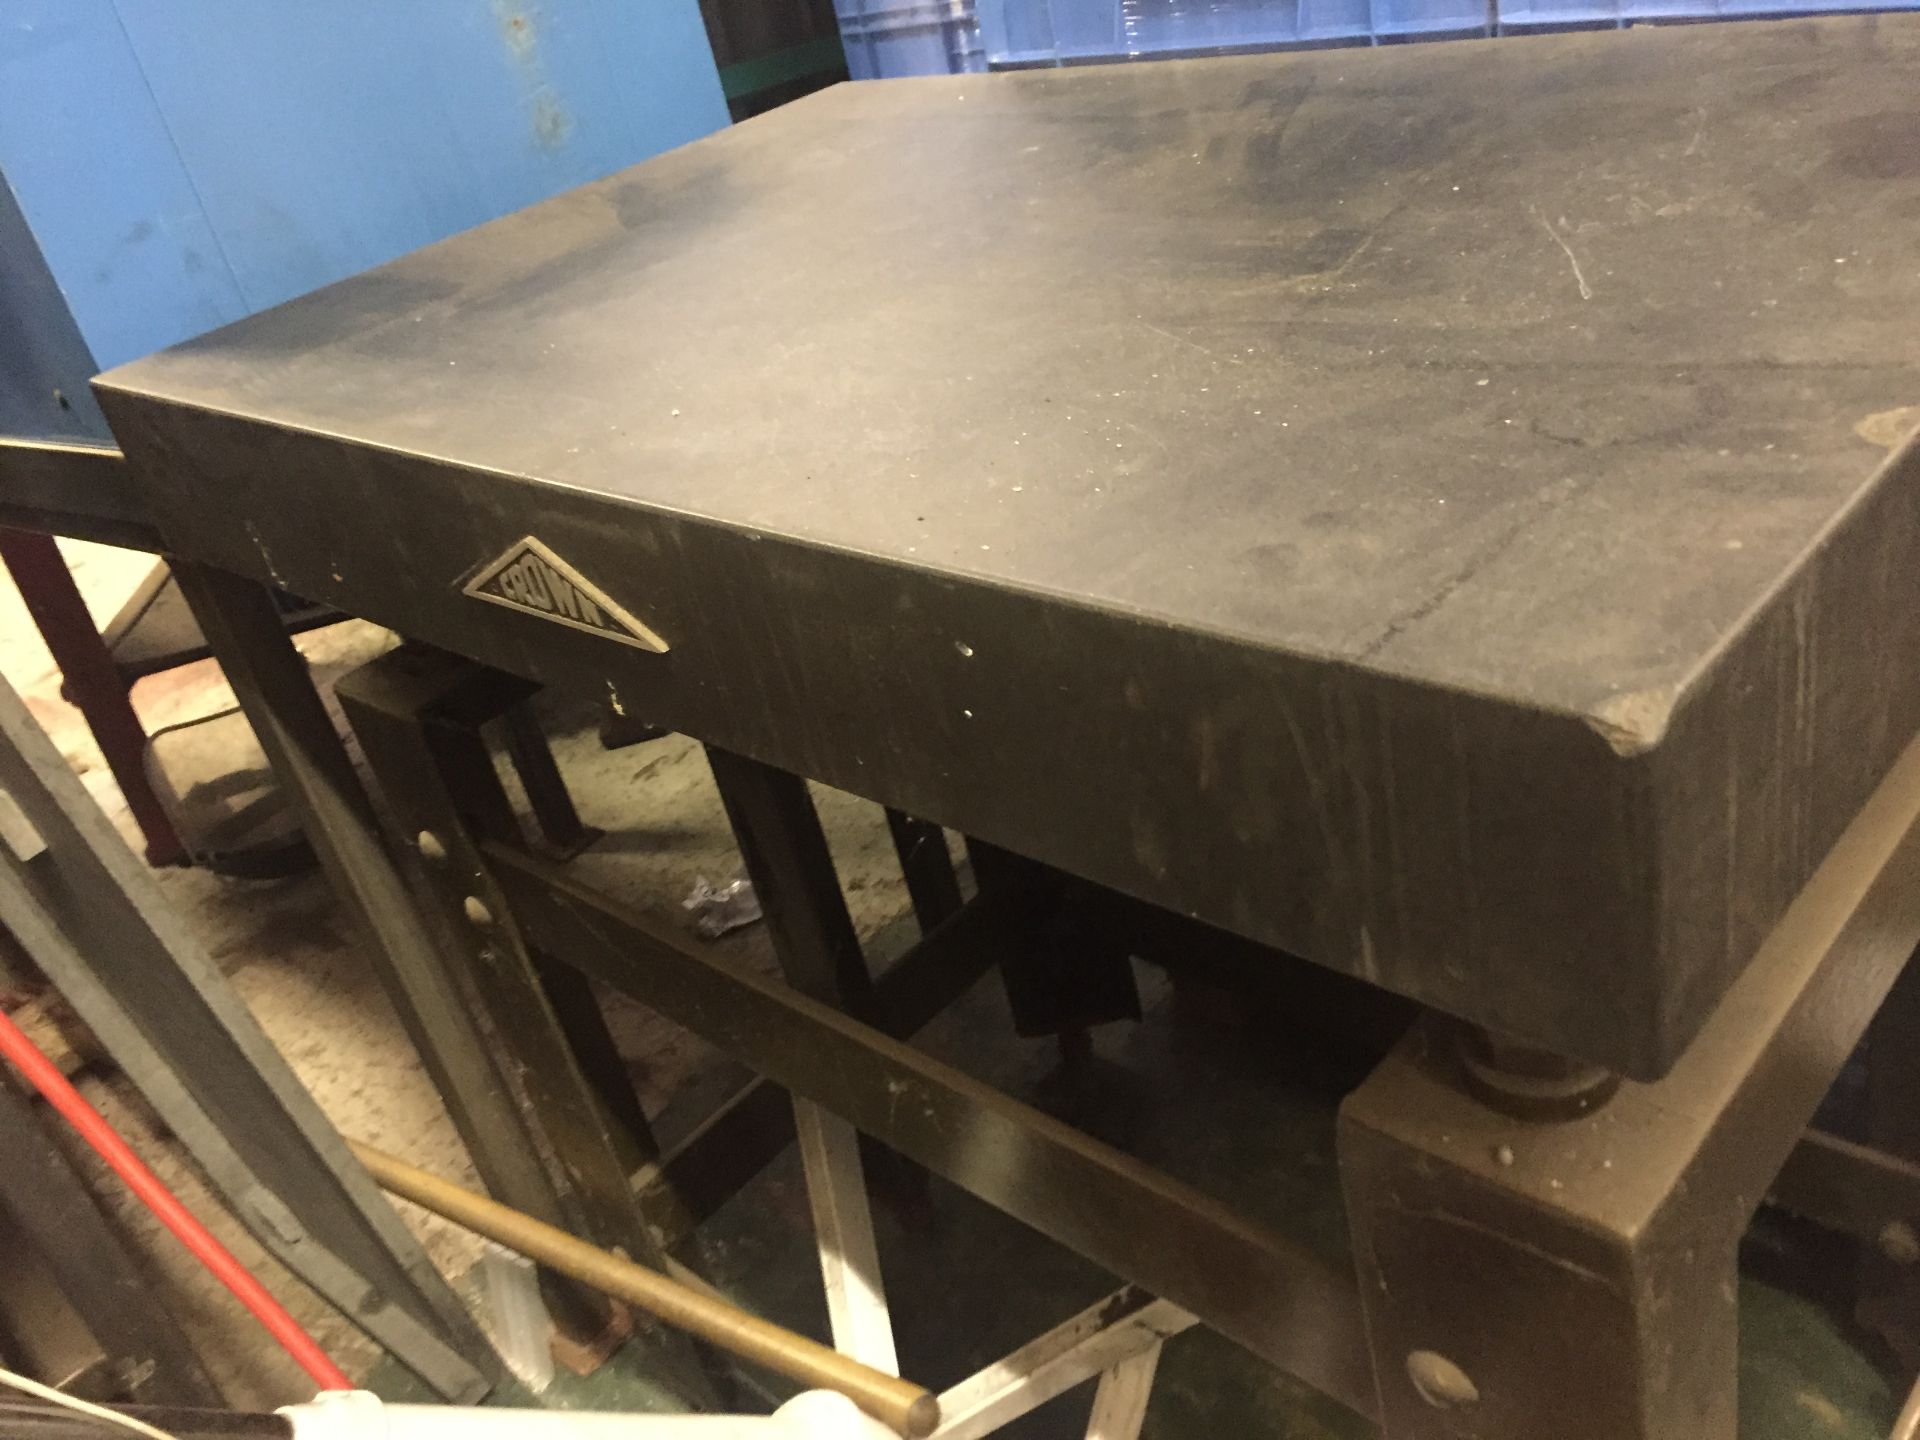 Crown granite surface table on steel frame, 91 x 61 cm - Image 2 of 2